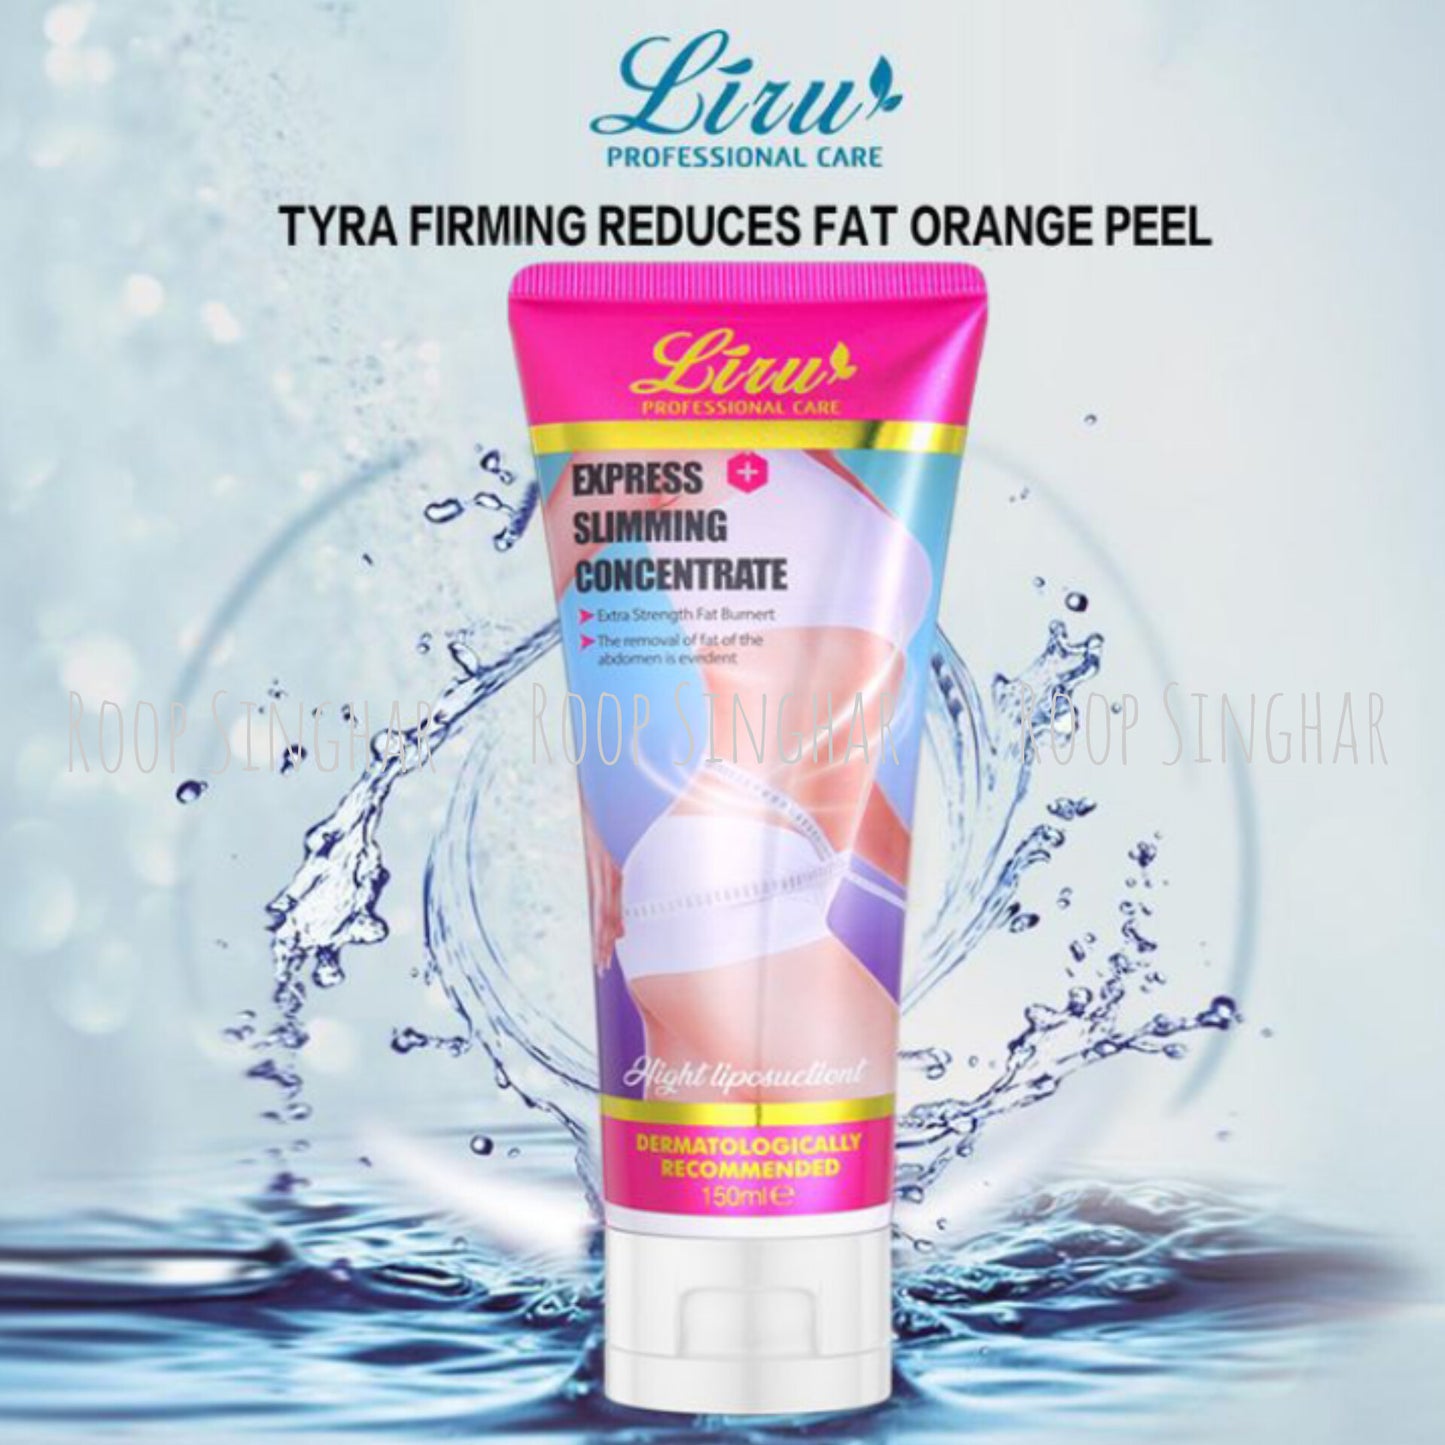 Liru PROFESSIONAL CARE SLIMMING EFFECT 95% EXPRESS.                                    SLIMMING.                                                CONCENTRATE (150ml)